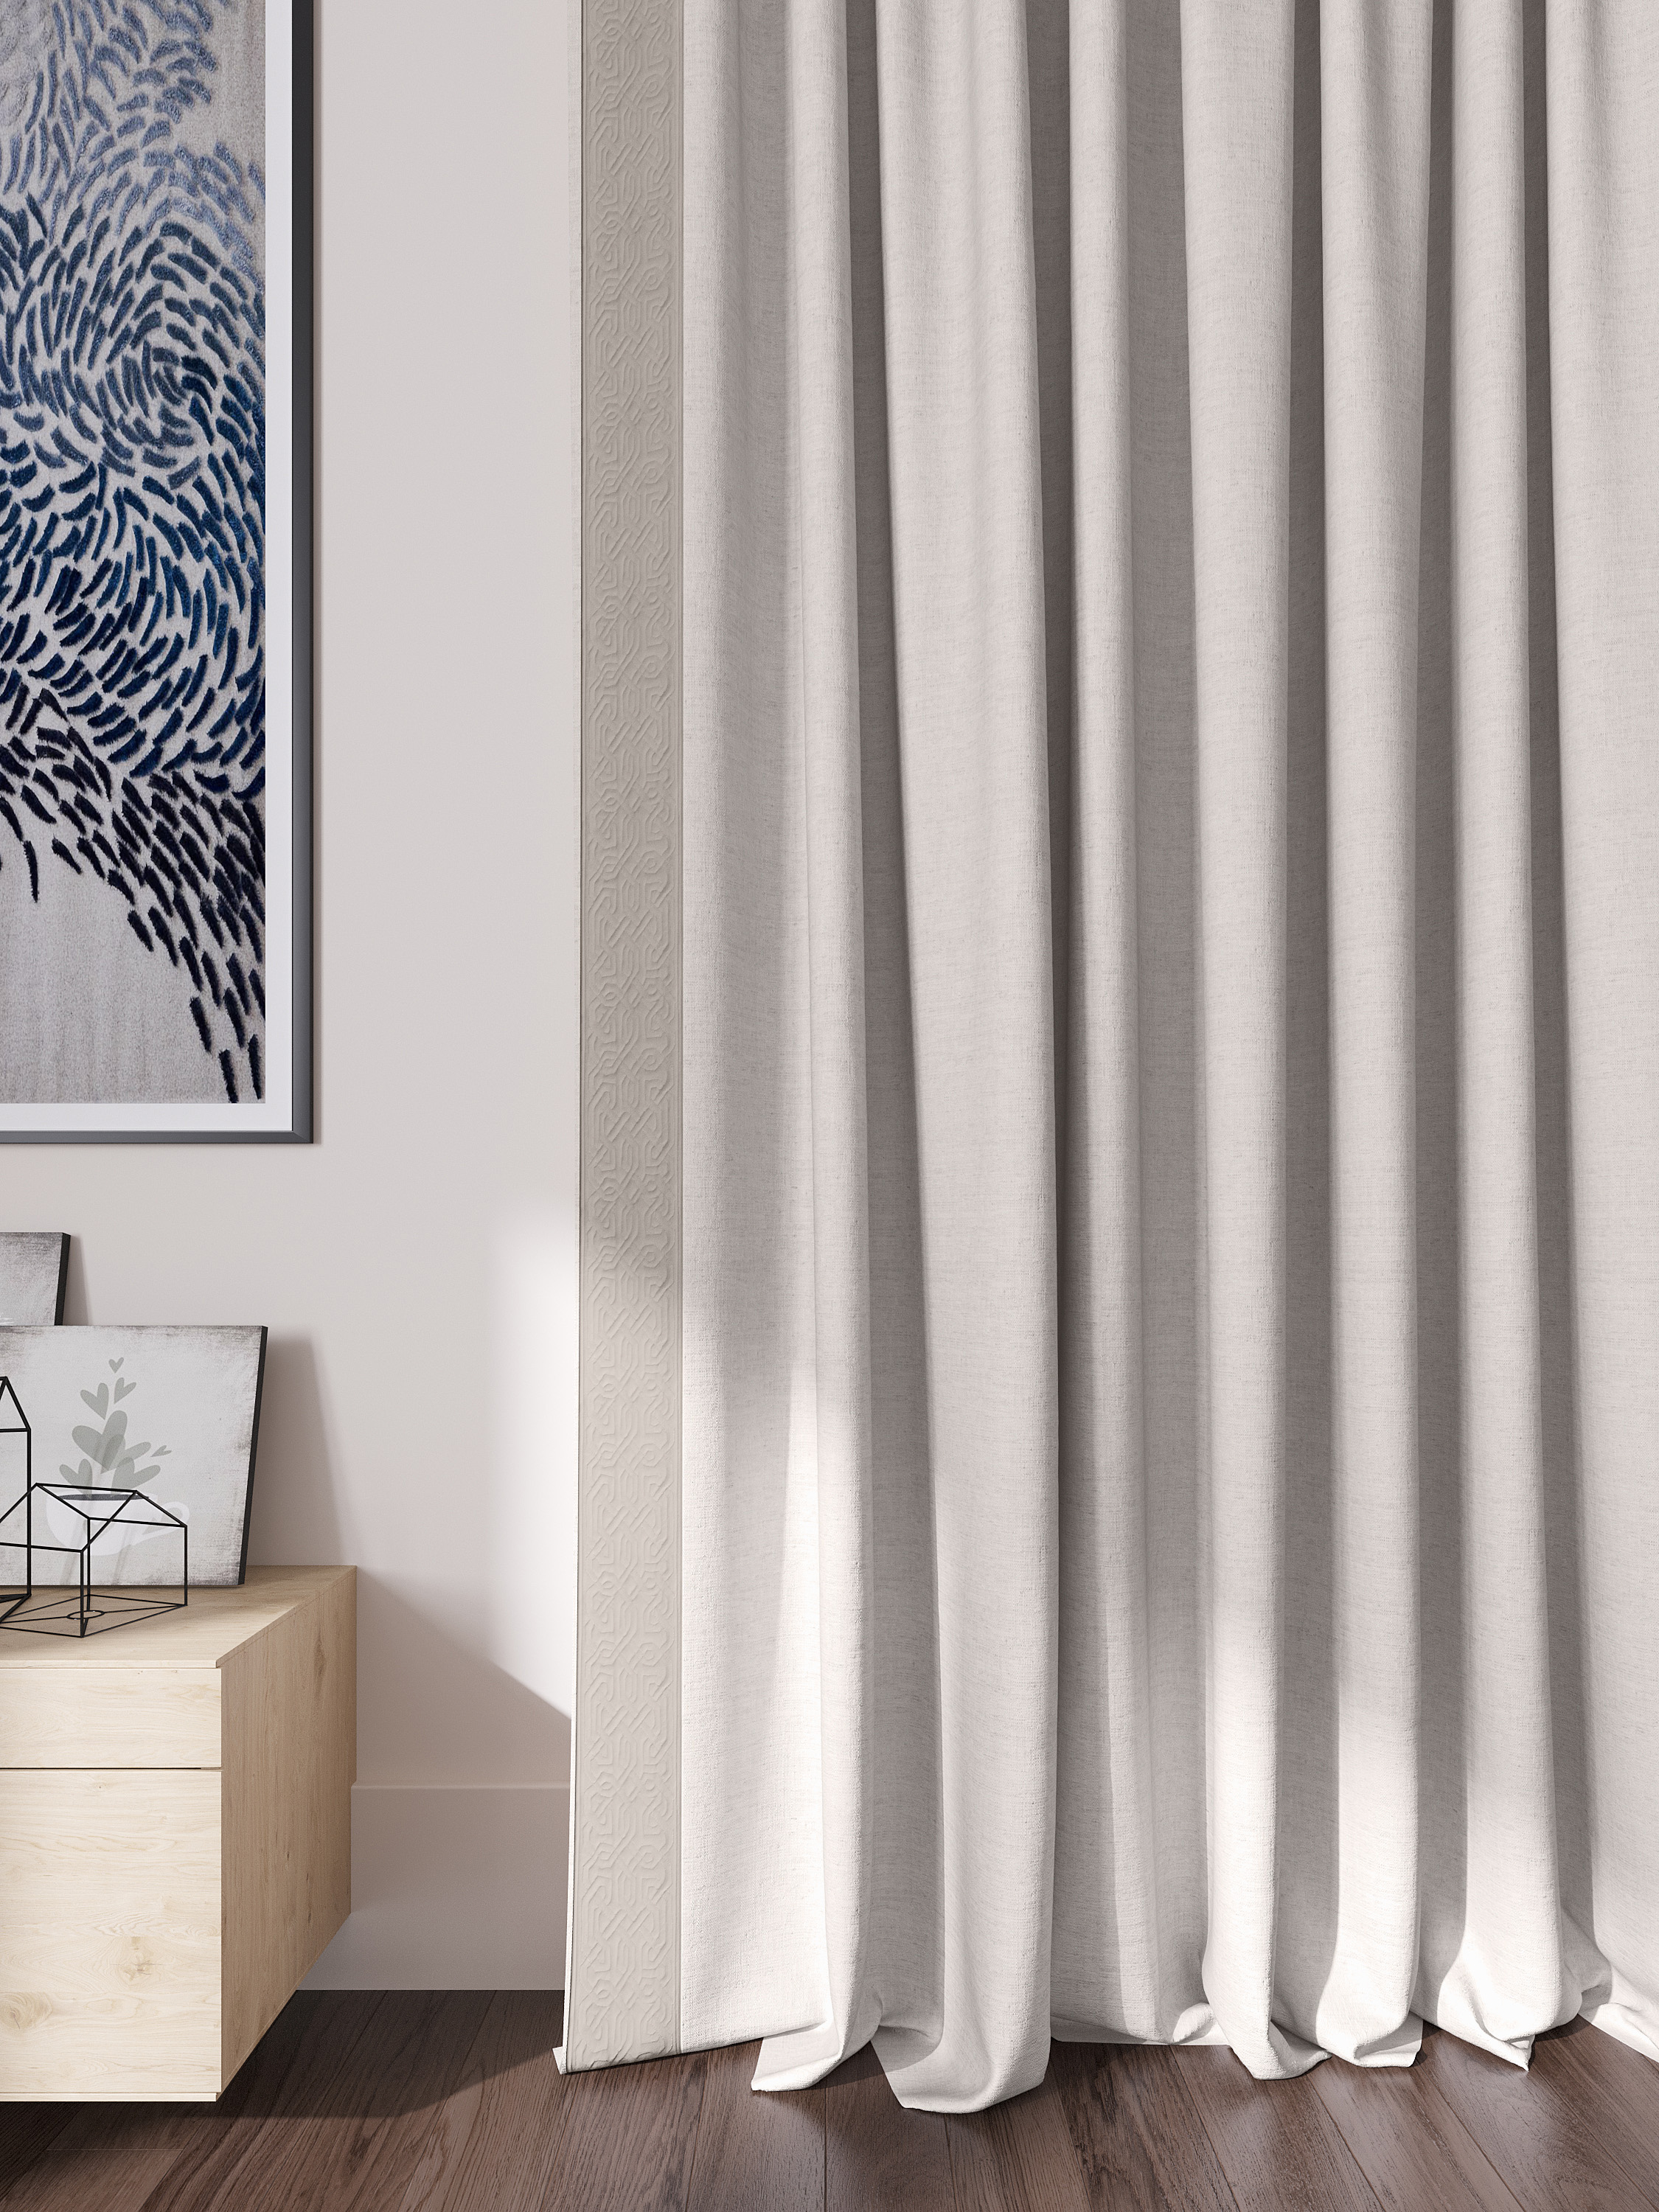  modern Curtains Design with Border Detail